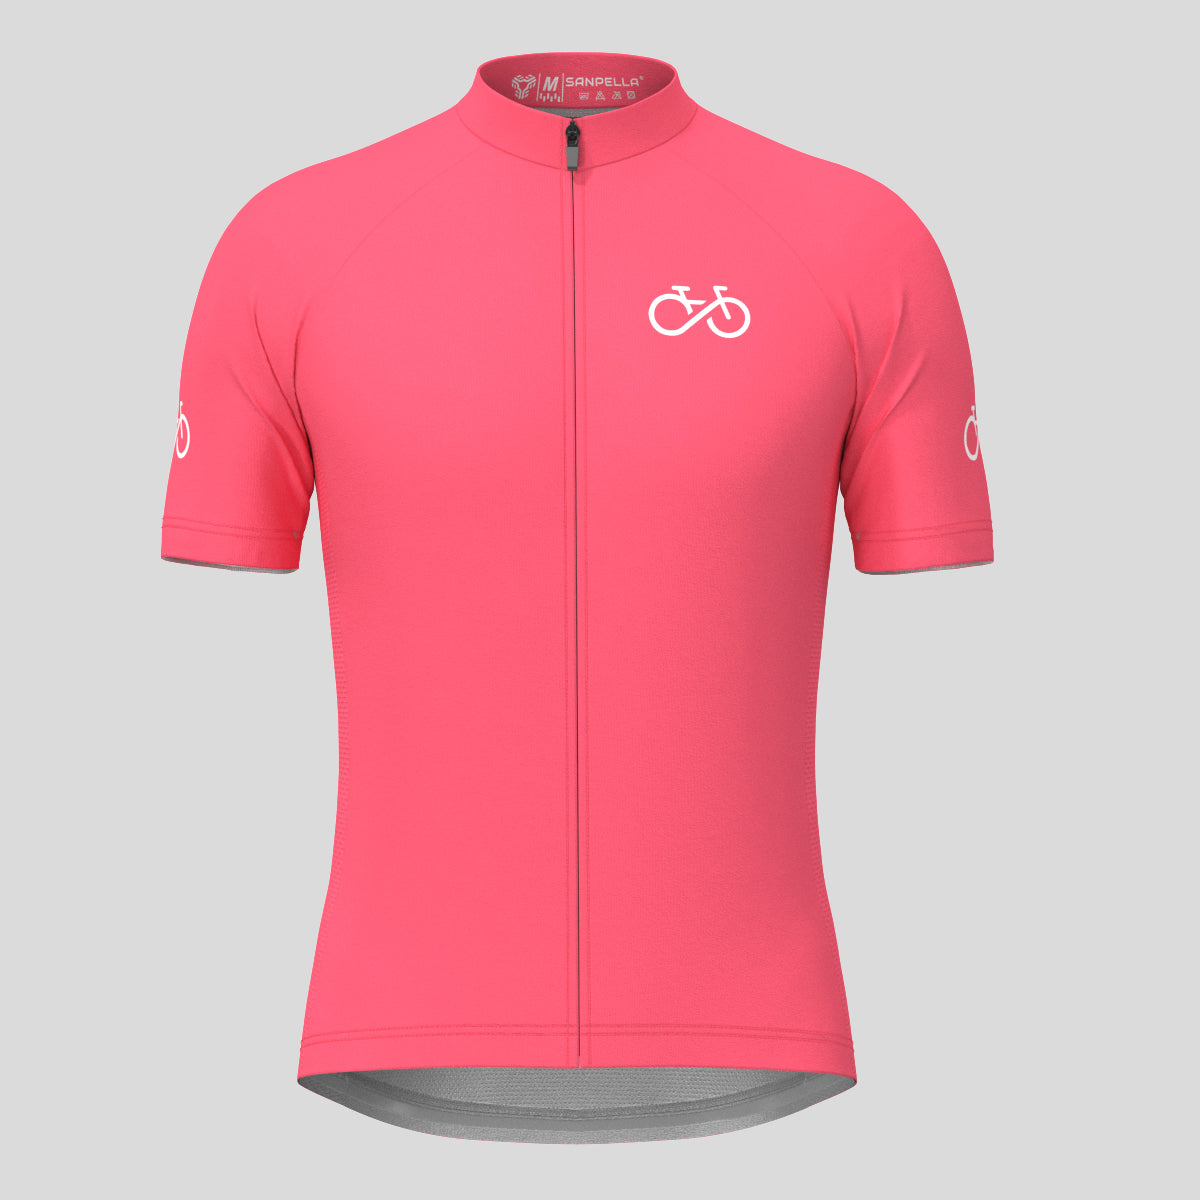 Ride Forever Men's Cycling Jersey -Pink